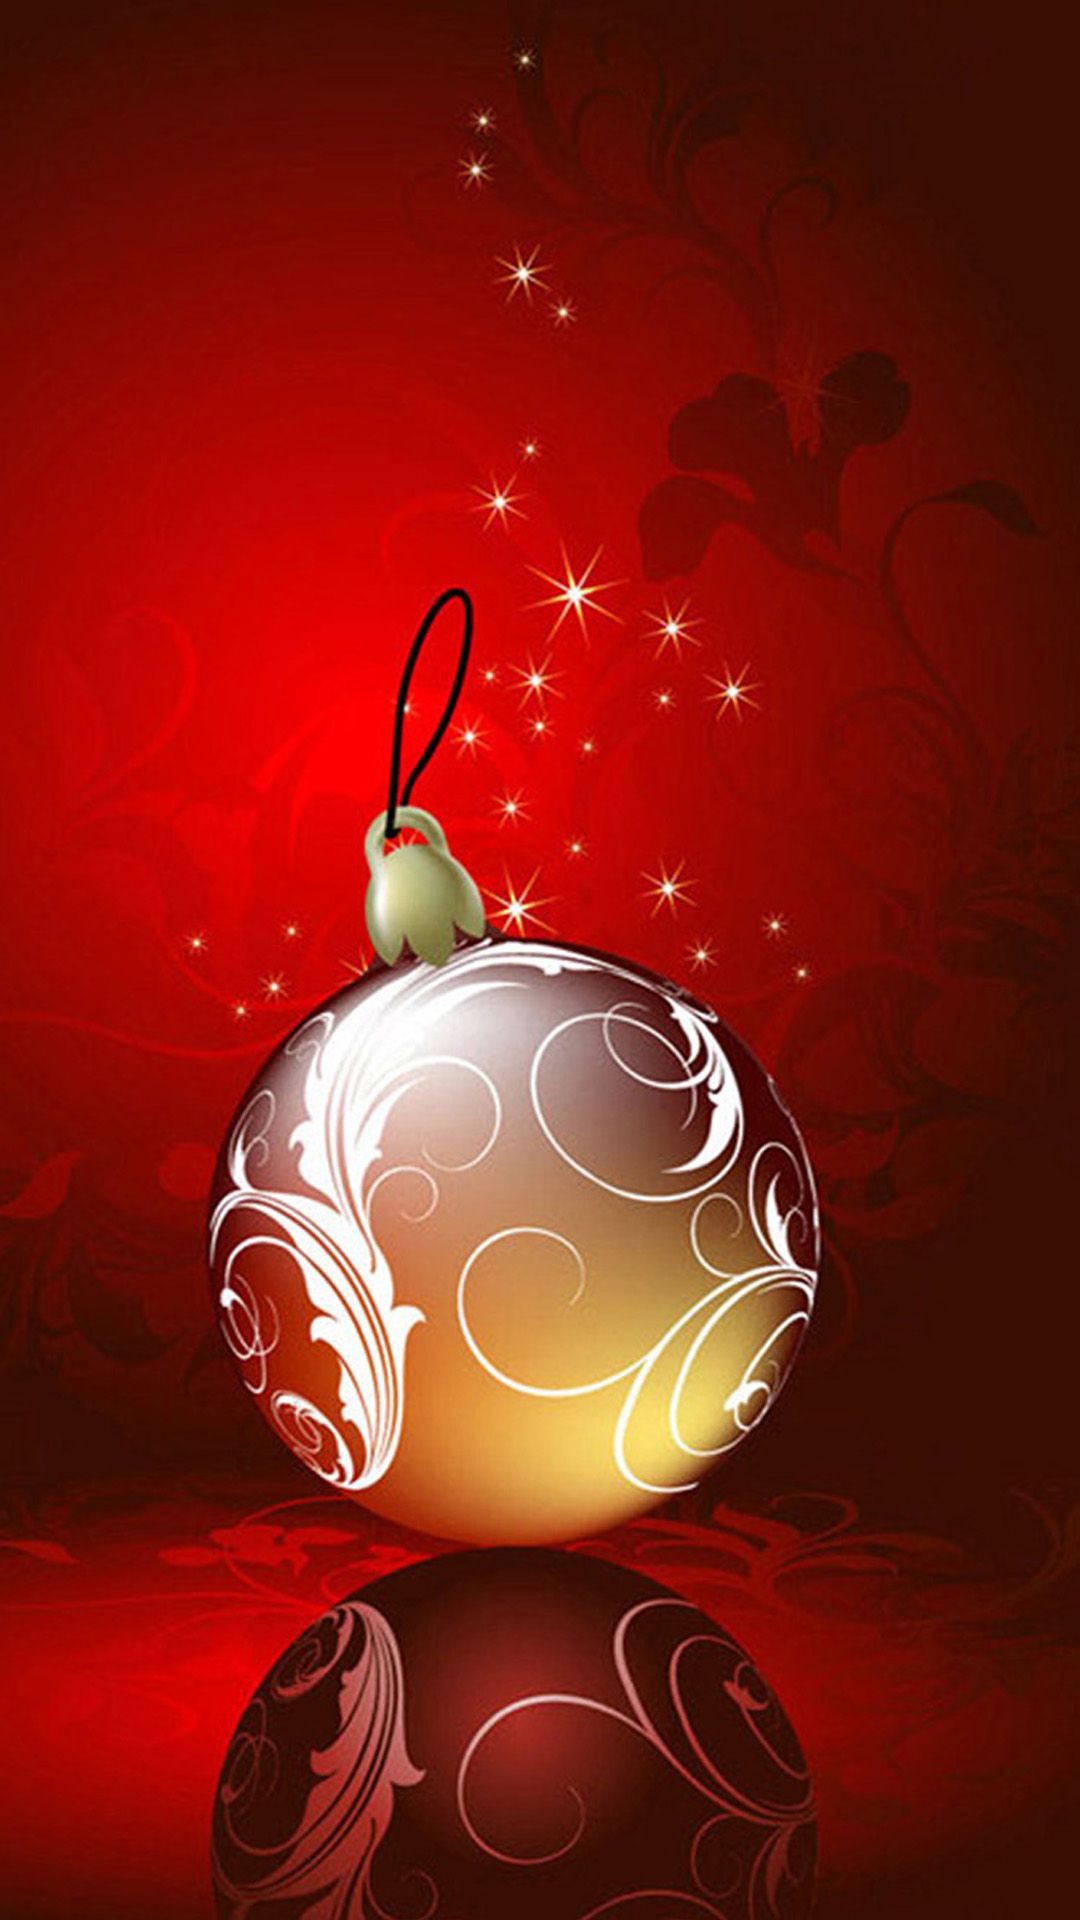 Christmas wallpaper for android androidwalls.org